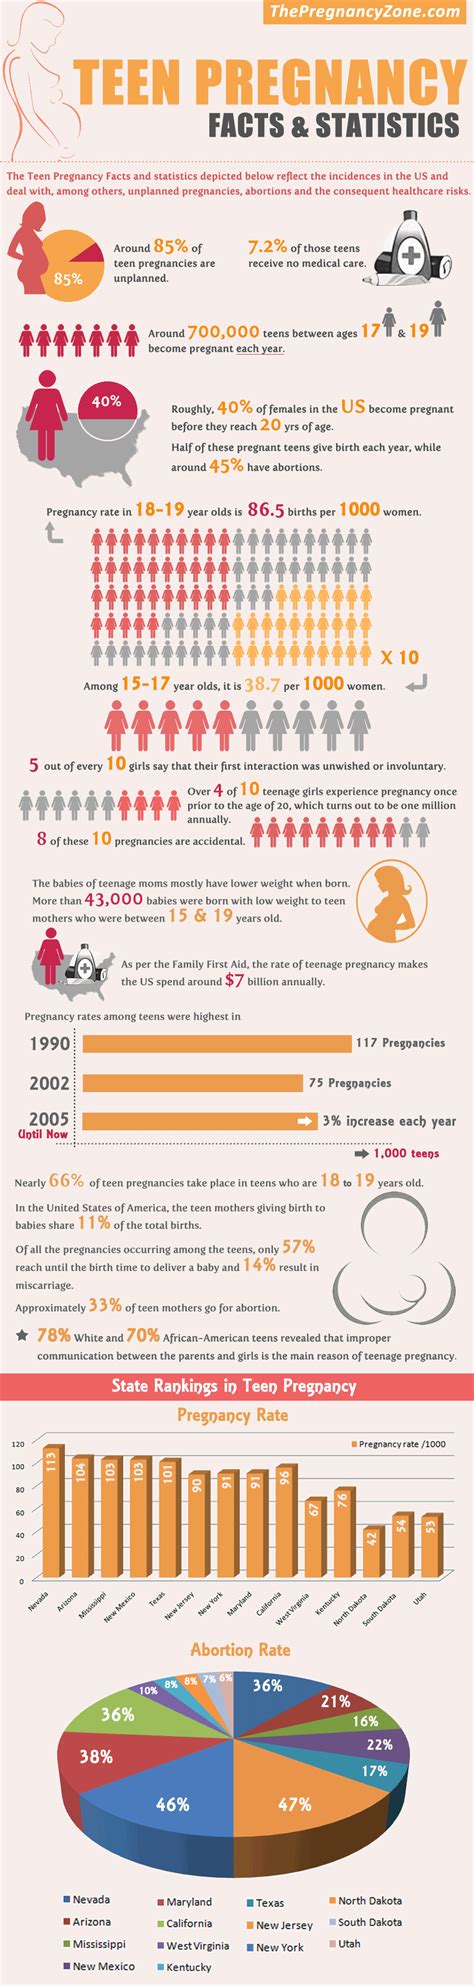 Teen Pregnancy Facts Infographic